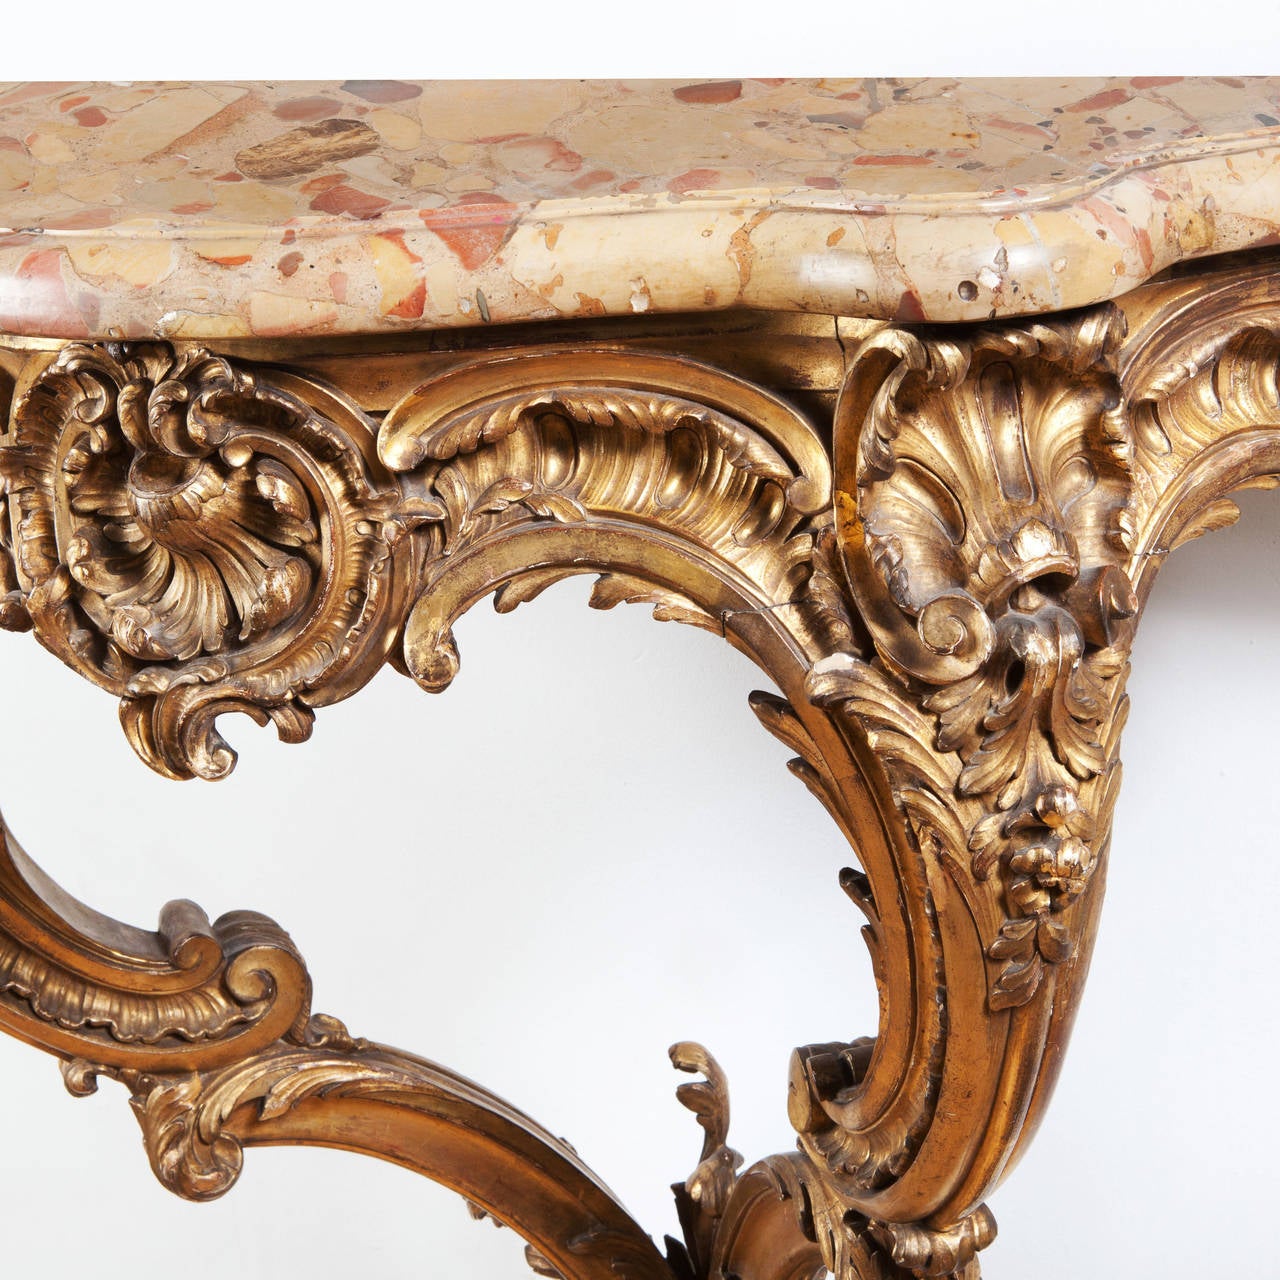 A finely carved mid 19th century Louis XV style gilt wood Rococo console table, voluptuously carve with interning foliate ornament. The table retains its original Brocatelle marble top.